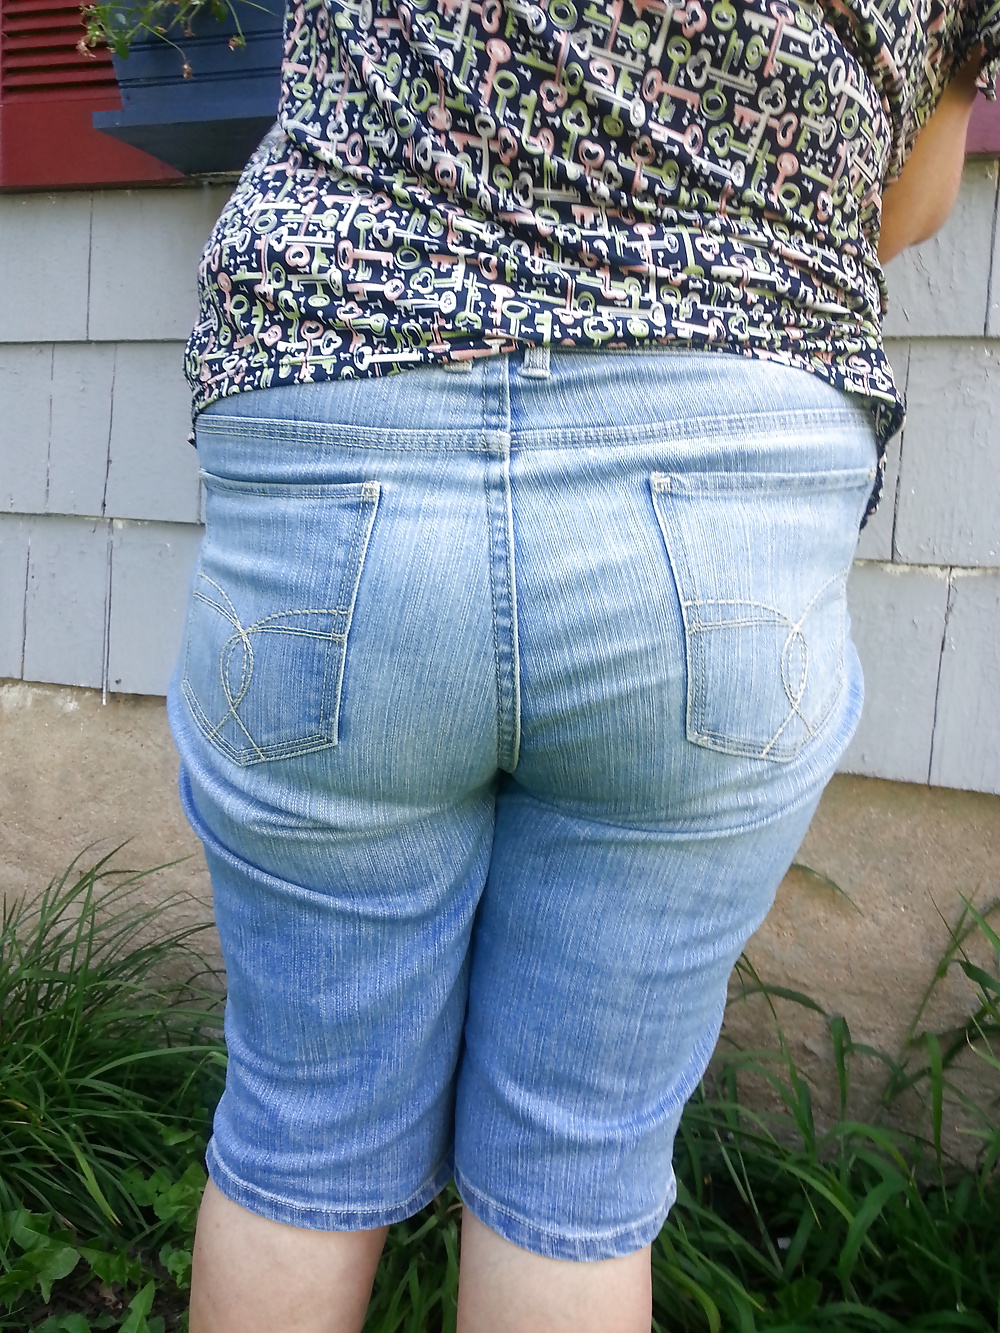 Wife in her tight ass jeans #4169526